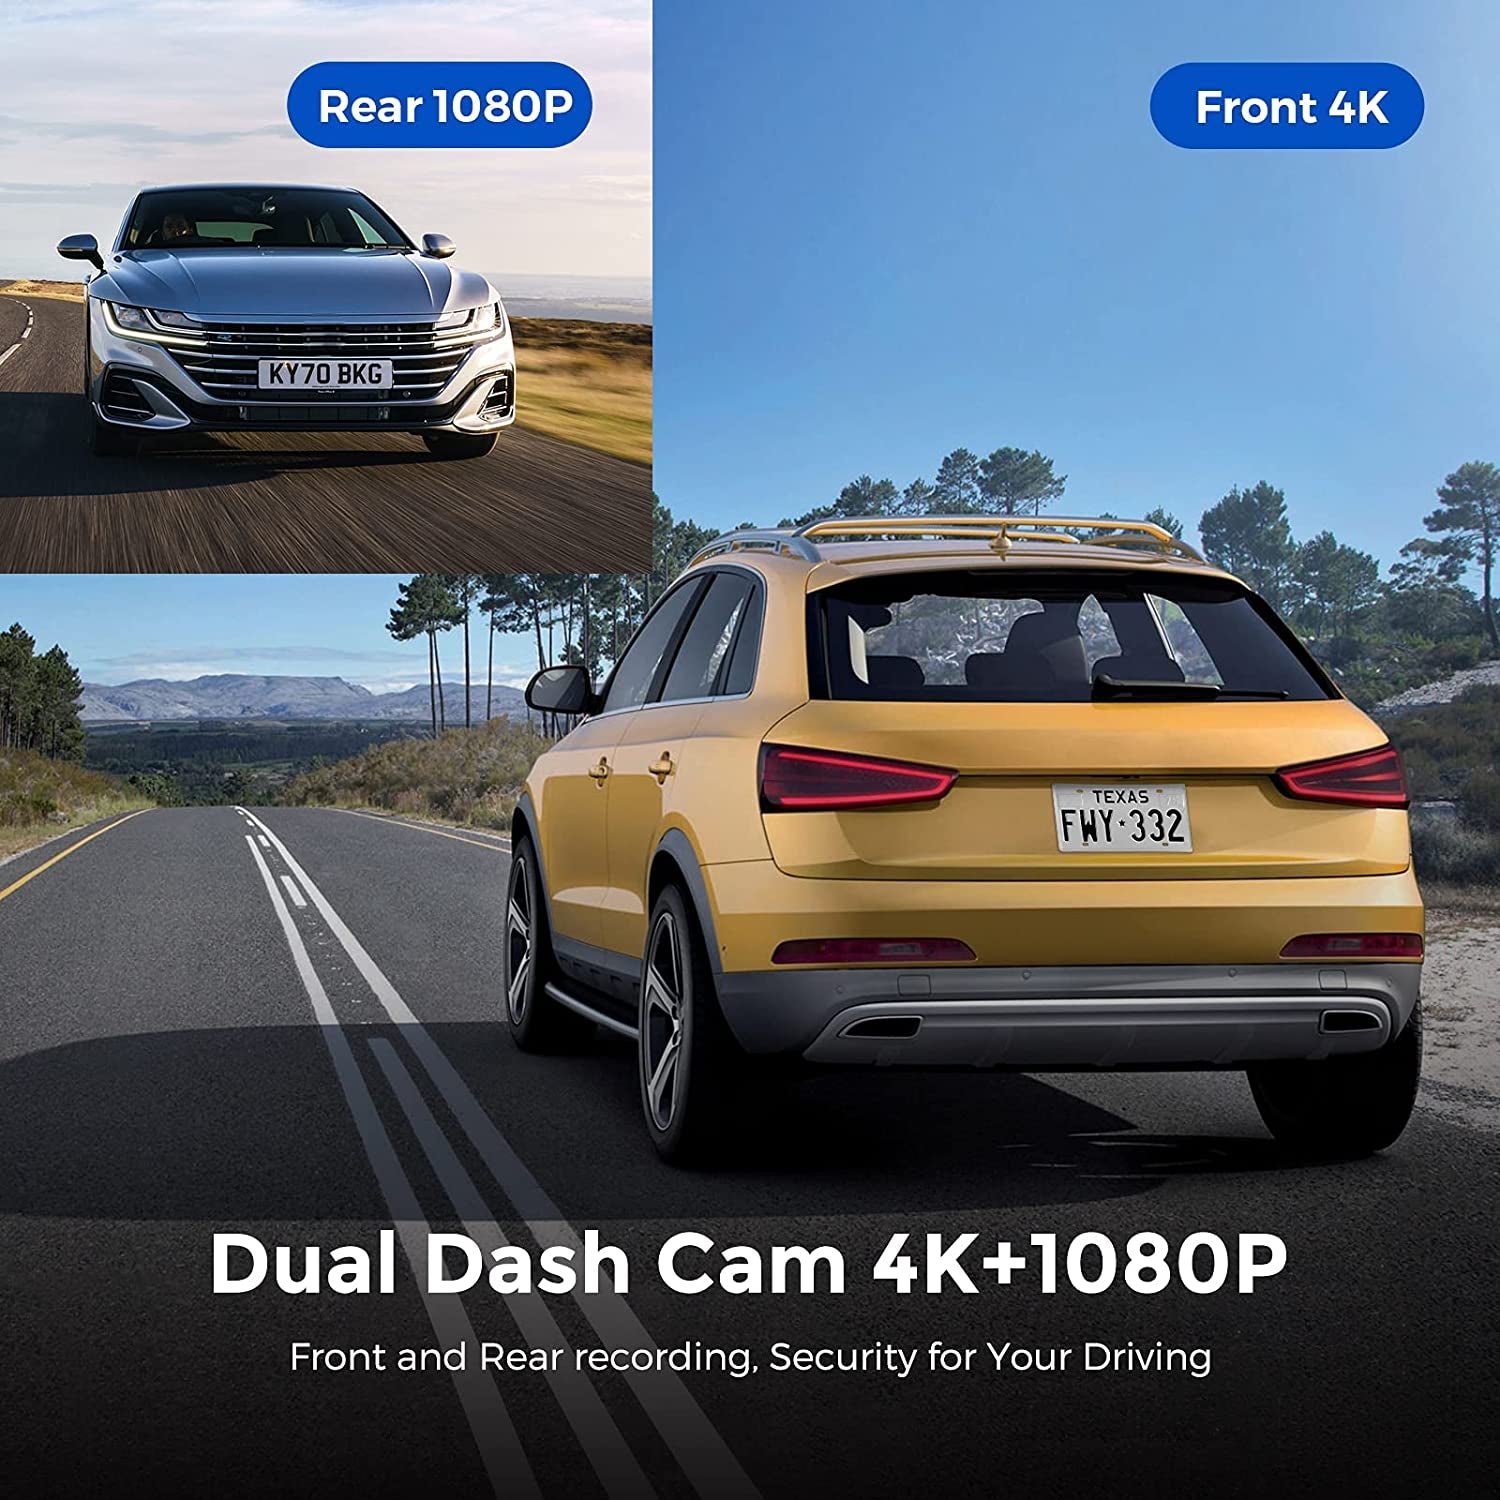 4K Dash Cam with Built-in WiFi GPS, 2160P UHD Dash Camera for Cars, 3.5  IPS Dashcam for Cars with 32GB Card, 170° Wide Angle, WDR, Night Vision